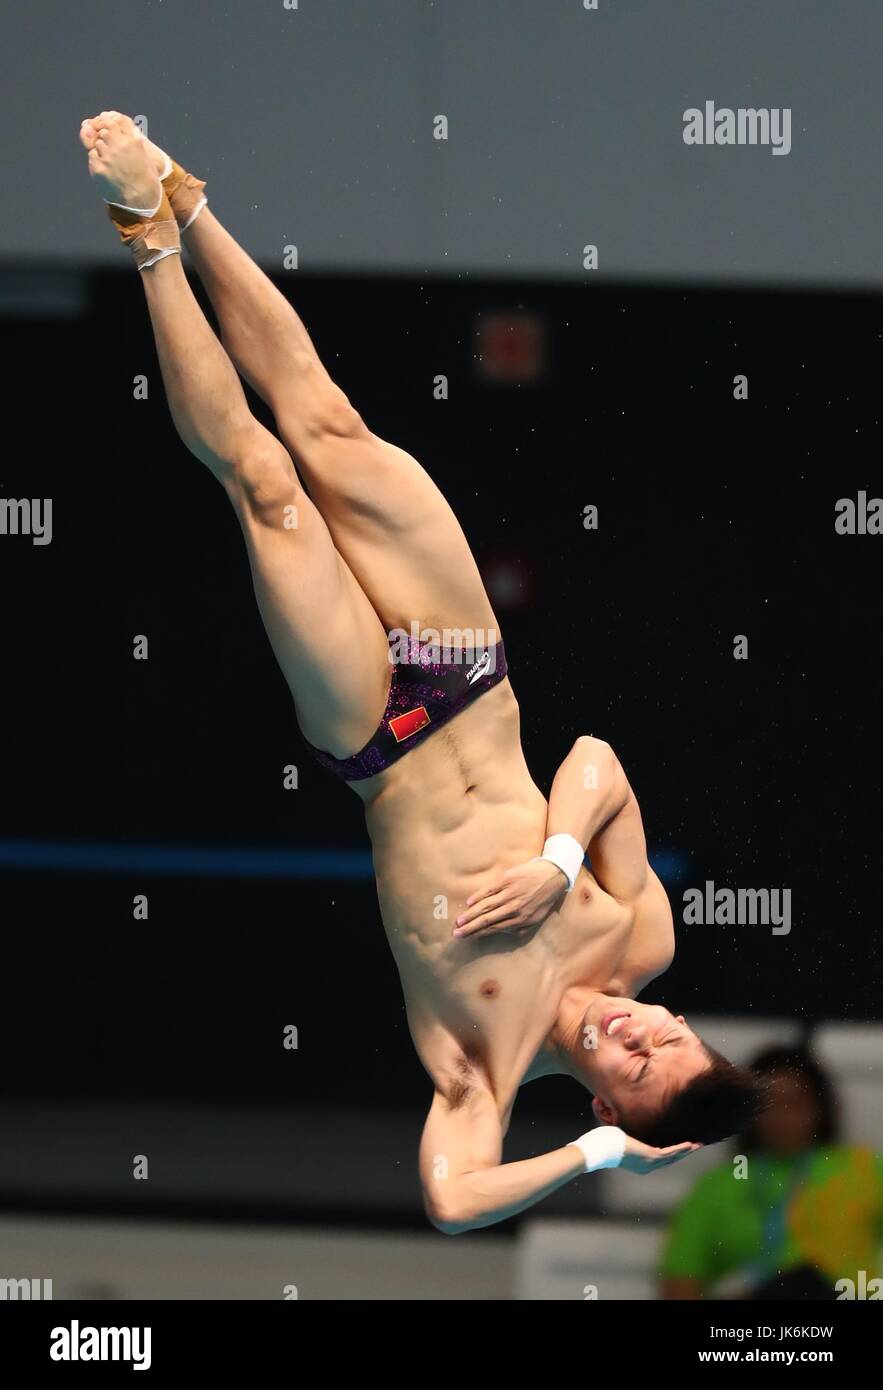 Budapest, Hungary. 22nd July, 2017. China's Chen Aisen competes during the men's 10m platform final of Diving at the 17th FINA World Championships at Duna Arena in Budapest, Hungary, on July 22, 2017. Chen Aisen won the silver medal with 585.25 points. Credit: Gong Bing/Xinhua/Alamy Live News Stock Photo